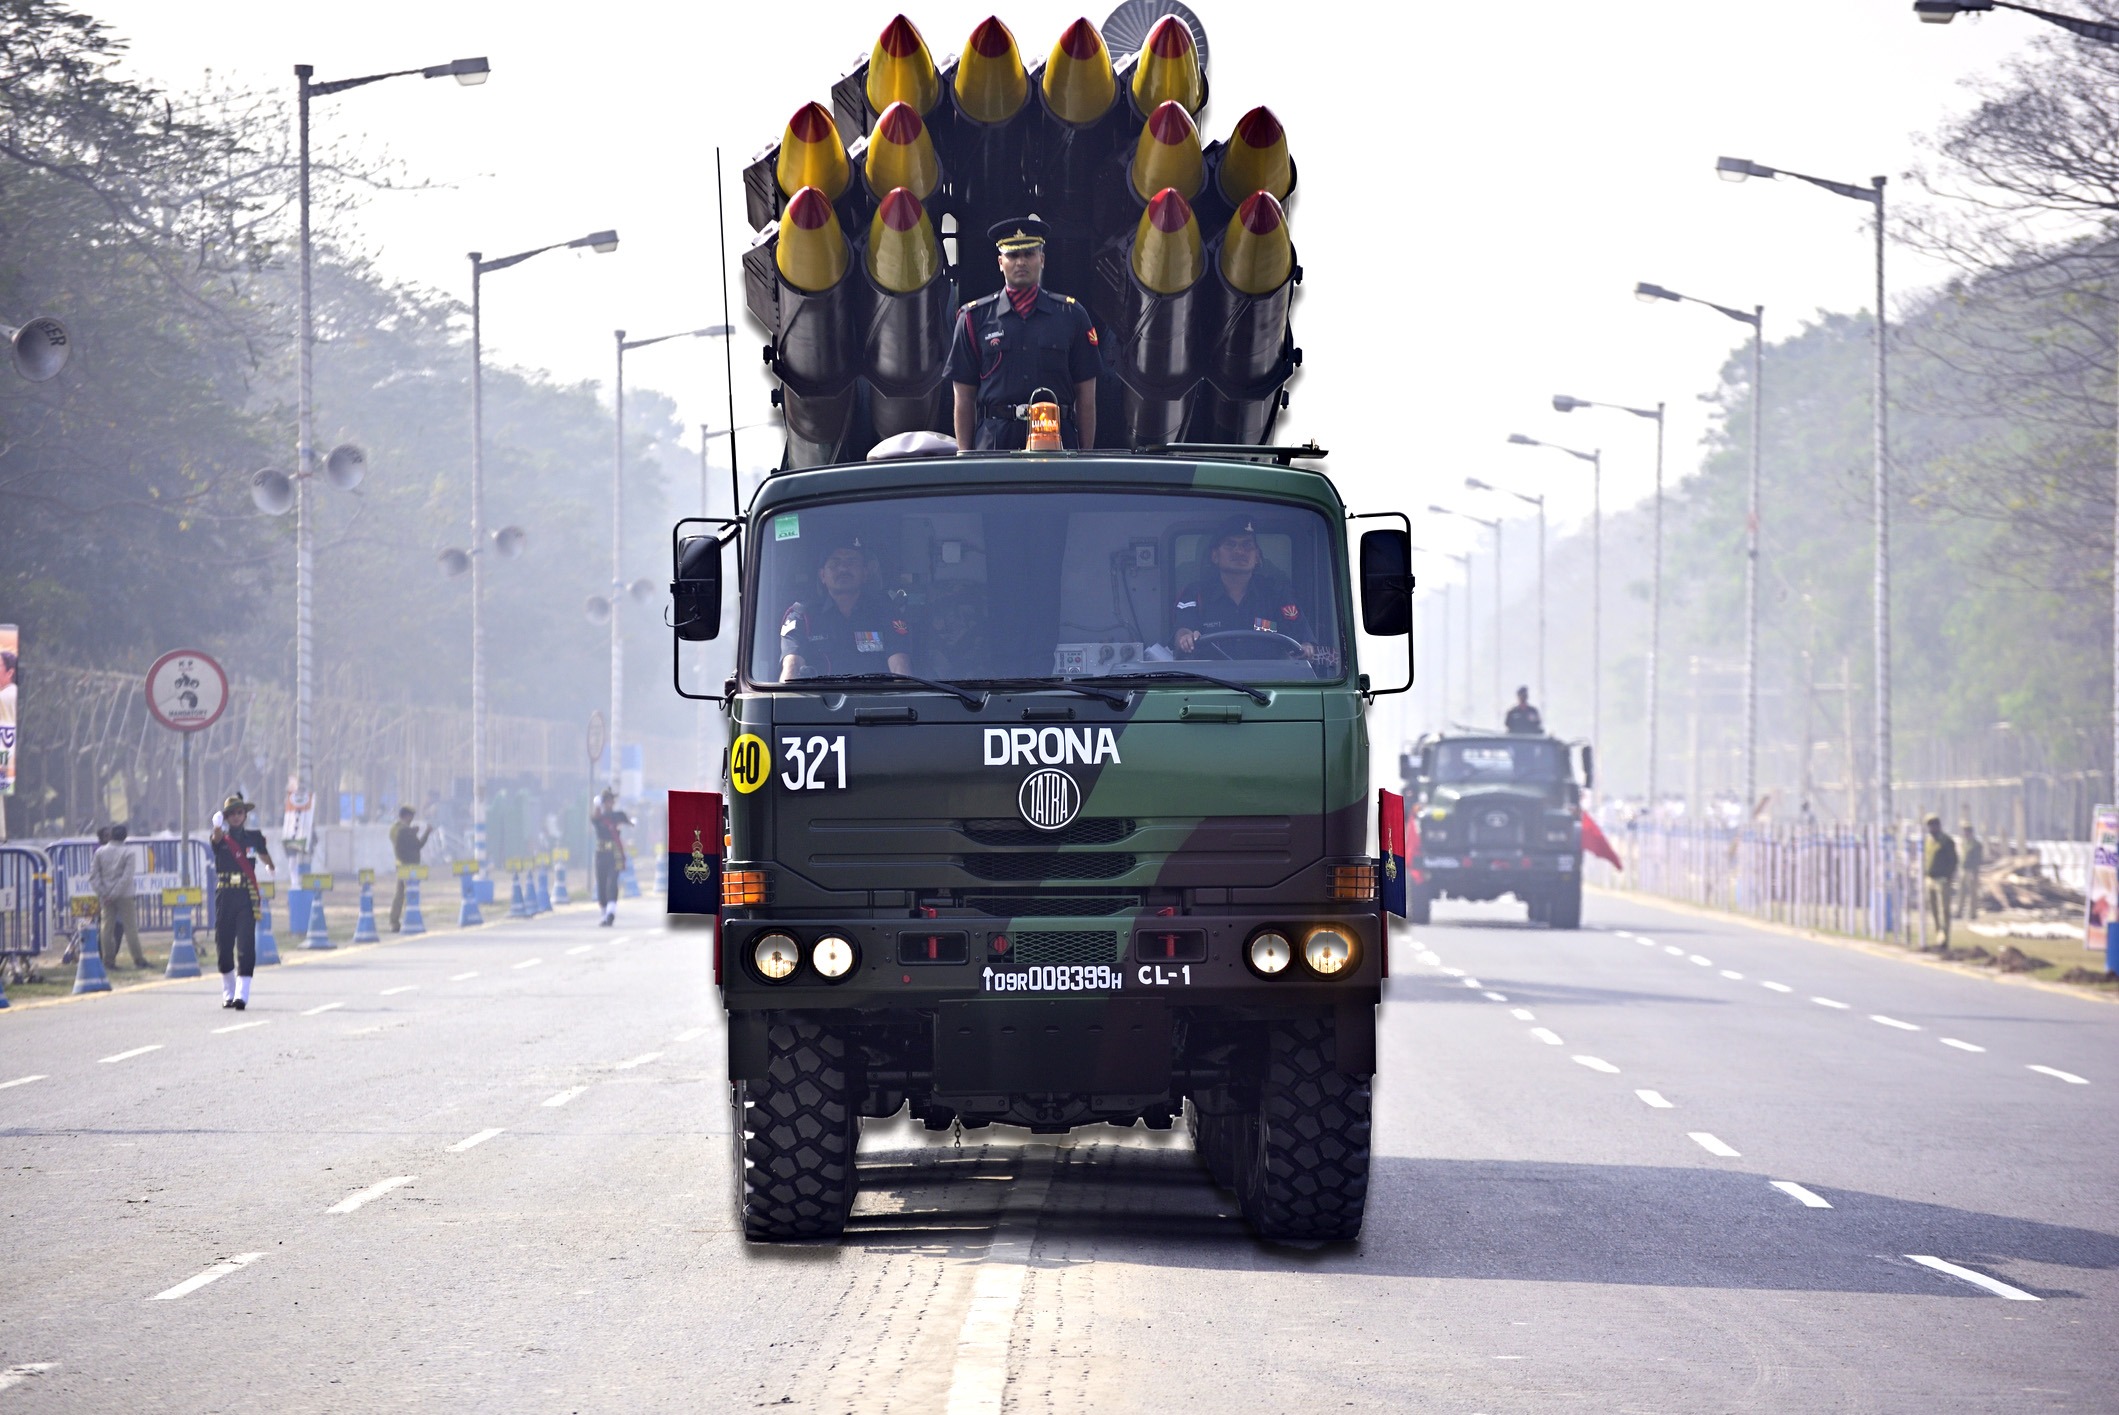 Nuclear Deterrence and Stability in South Asia: The Inadequacies of a Regional Lens